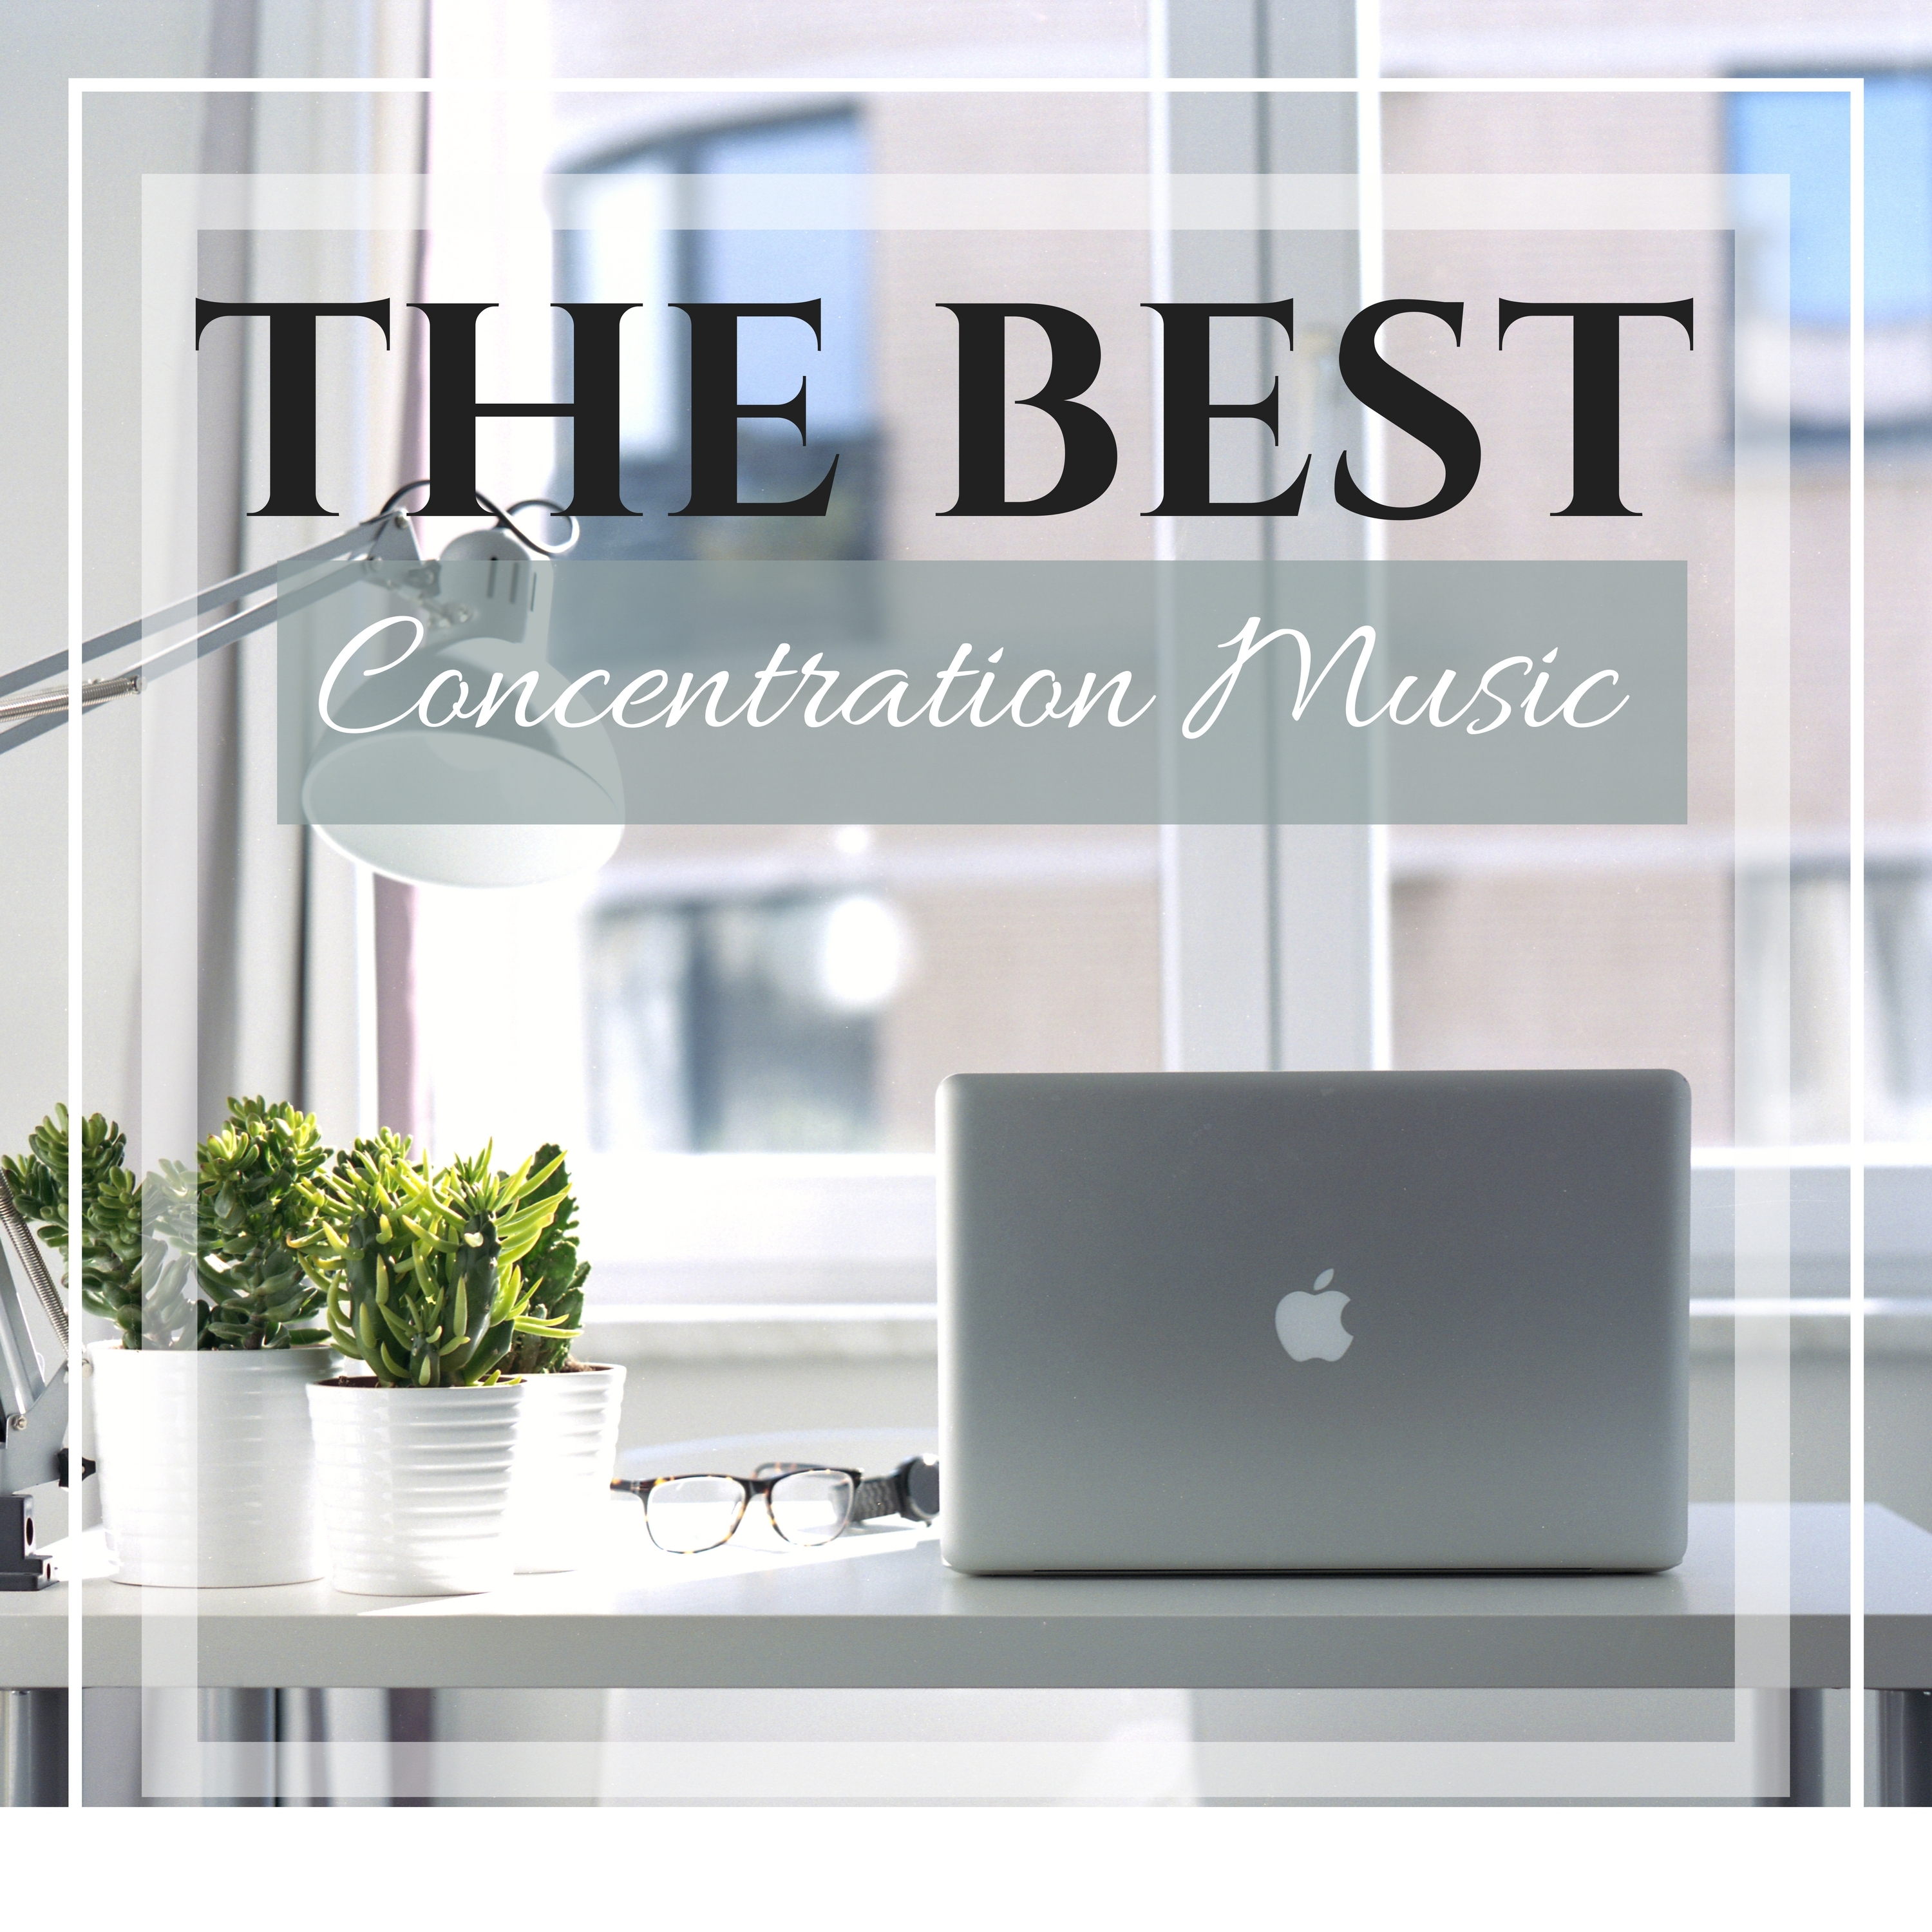 The Best Concentration Music